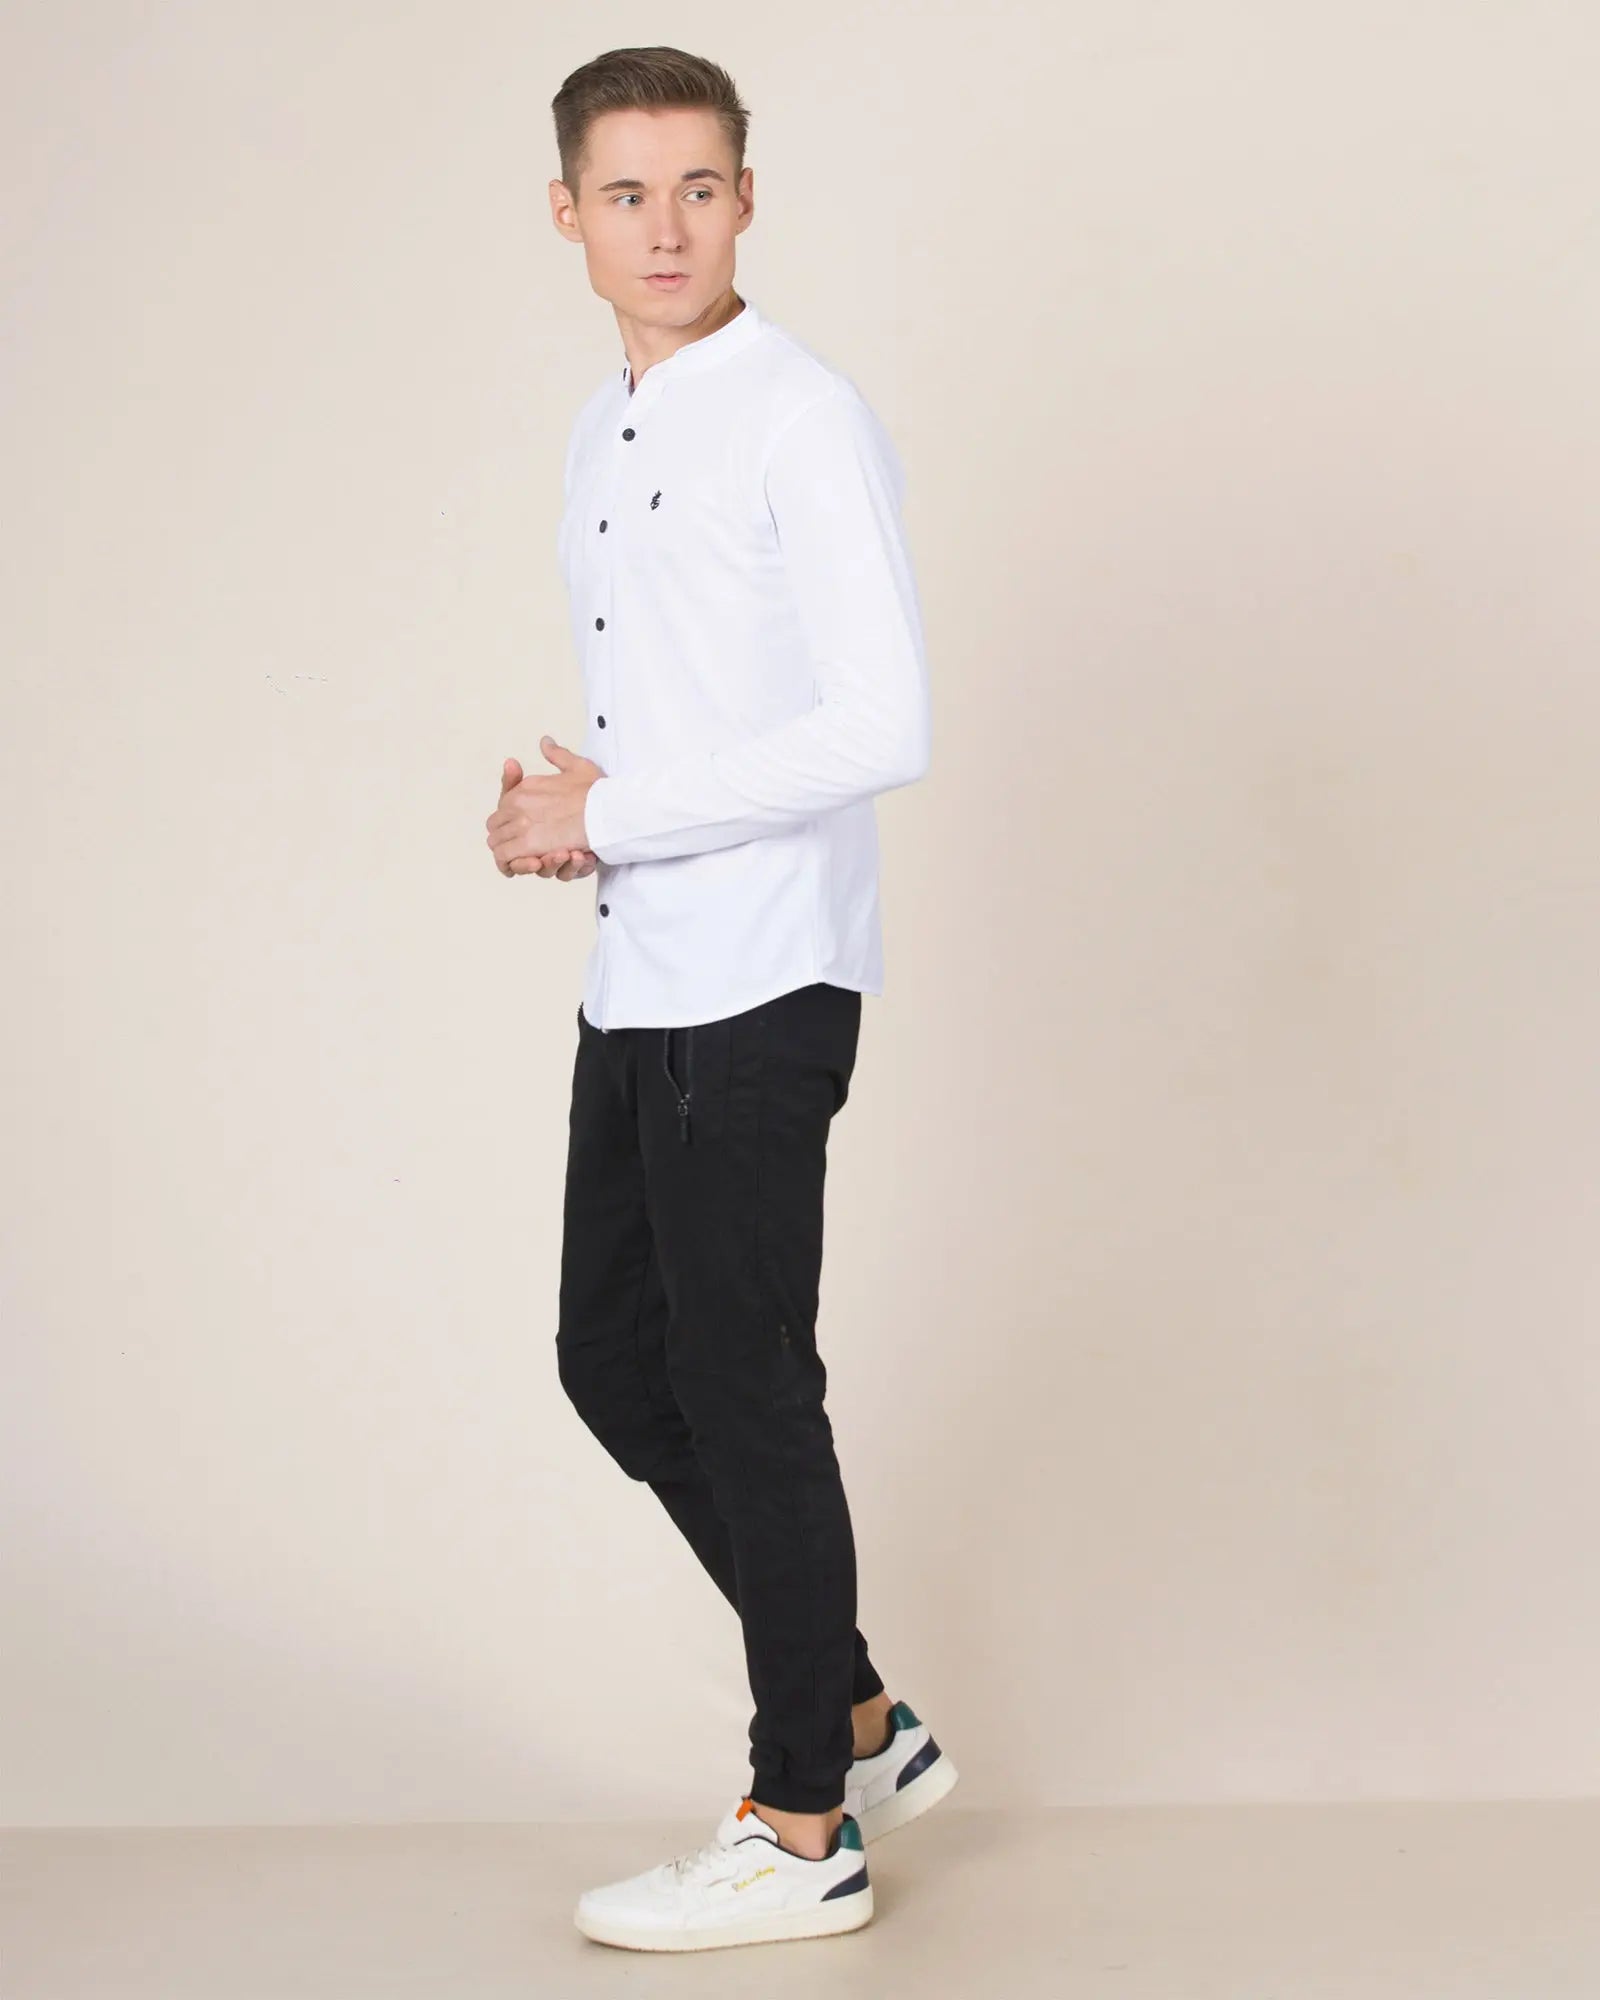 LCY London | Capsule Collection - Men&#39;s Hybrid Long Sleeved Shirt | Full Buttoned LCY London